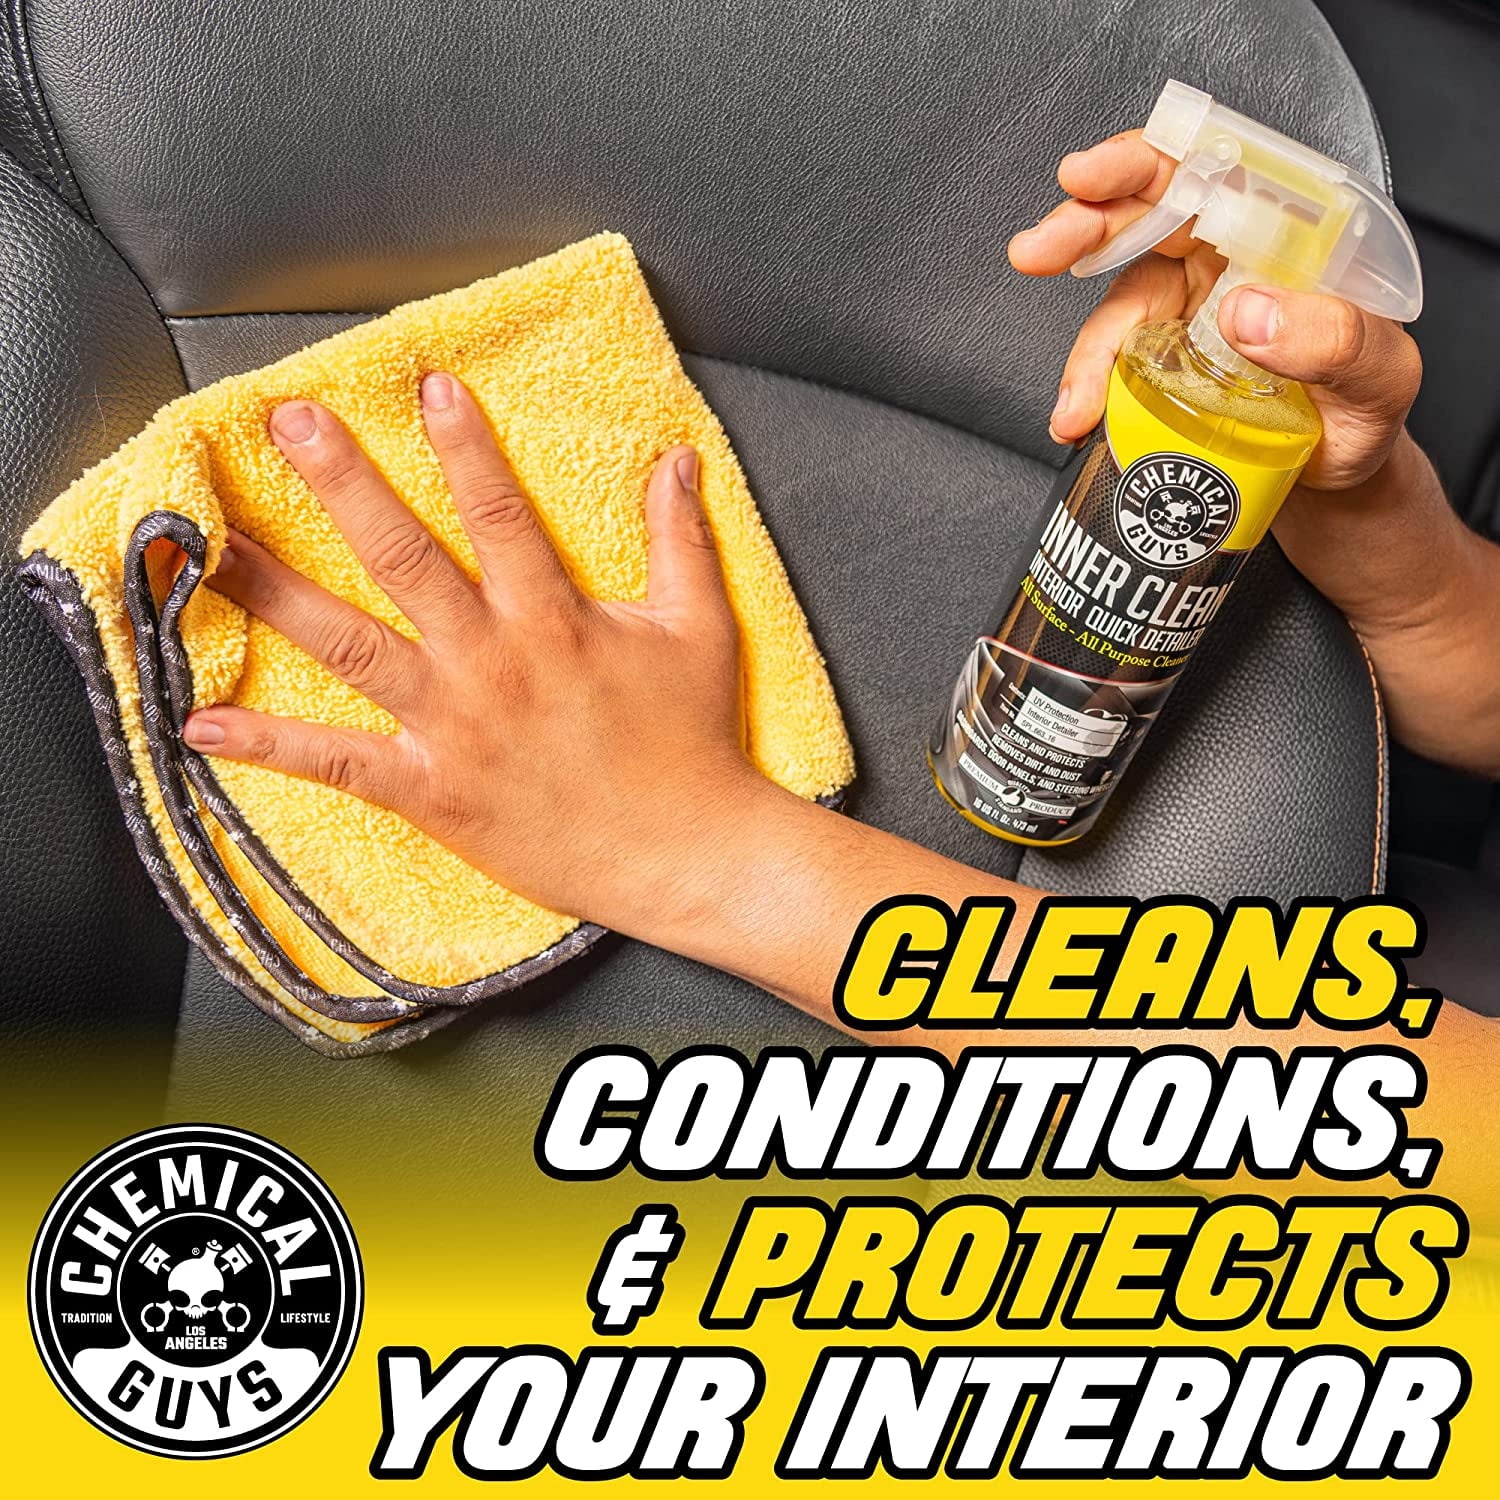 How To Properly Clean Interior Surfaces! - Chemical Guys 